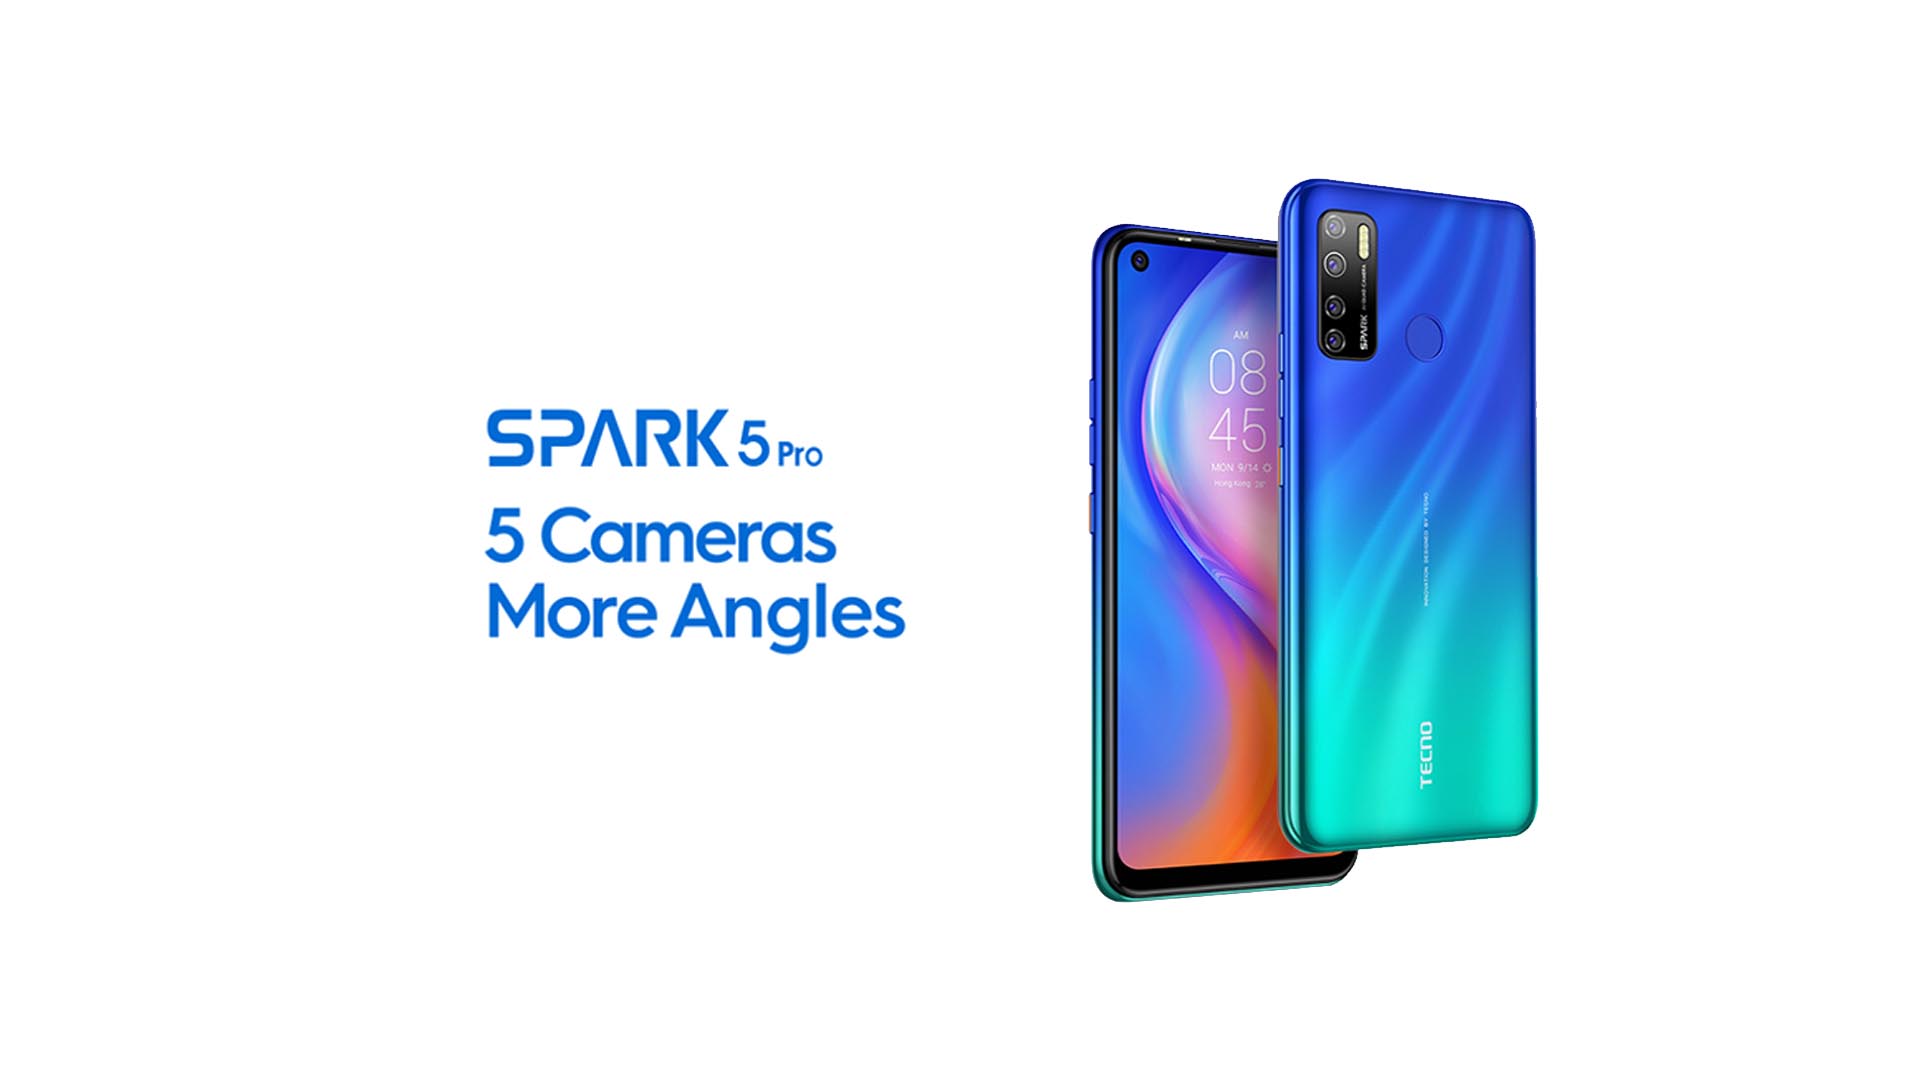 TECNO set to launch SPARK 5 Pro in the Philippines